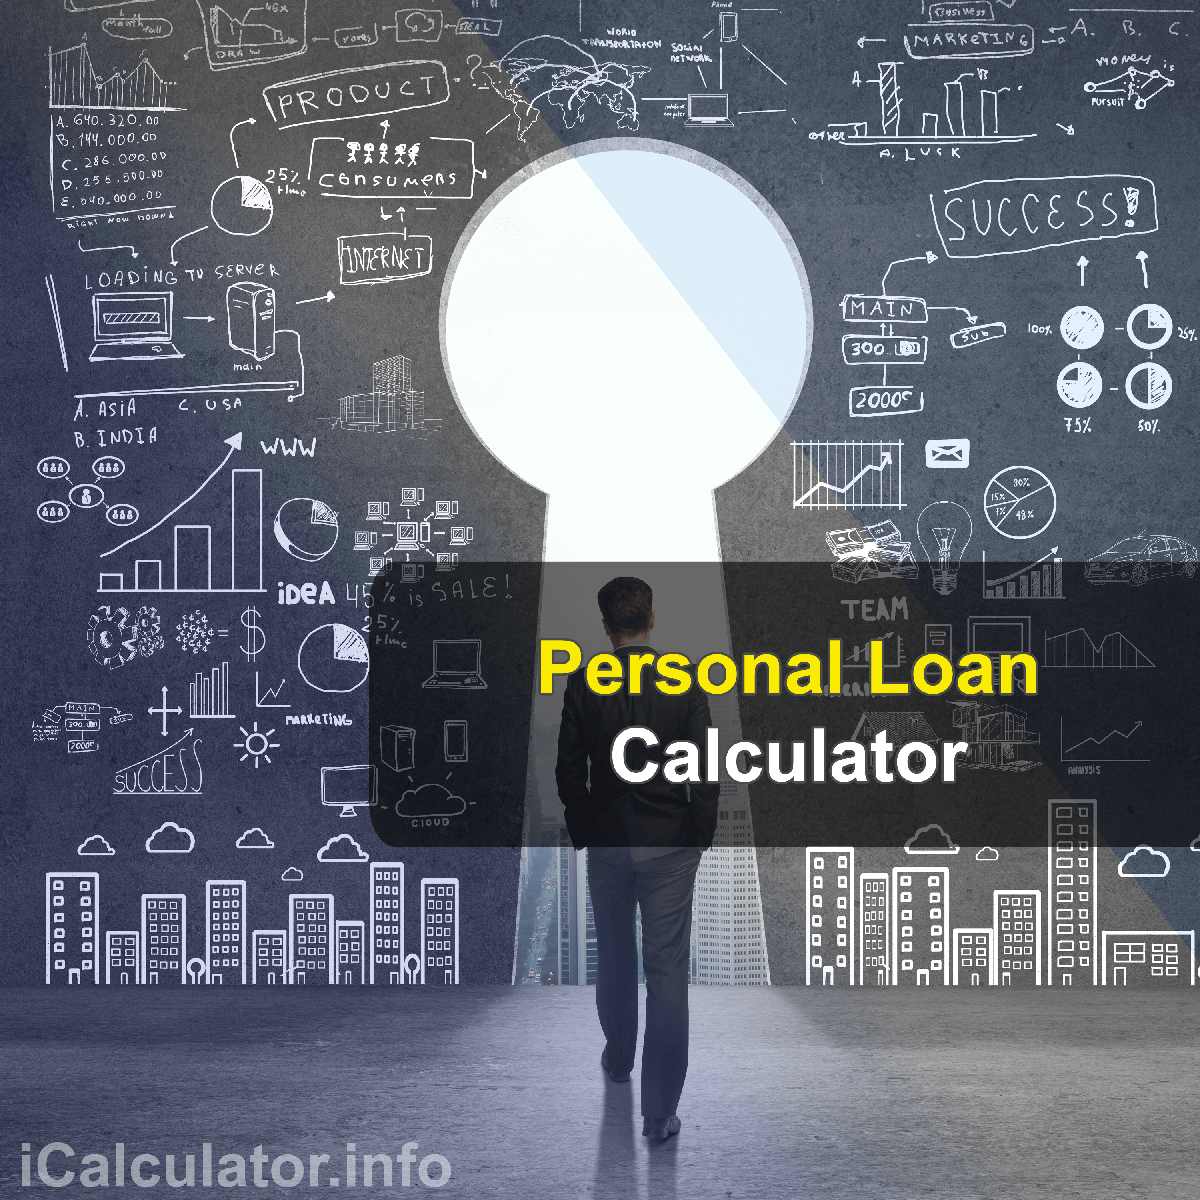 Personal Loan Calculator. This image shows the personal loan formula for the personal loan Calculator and associated free online calculators on iCalculator